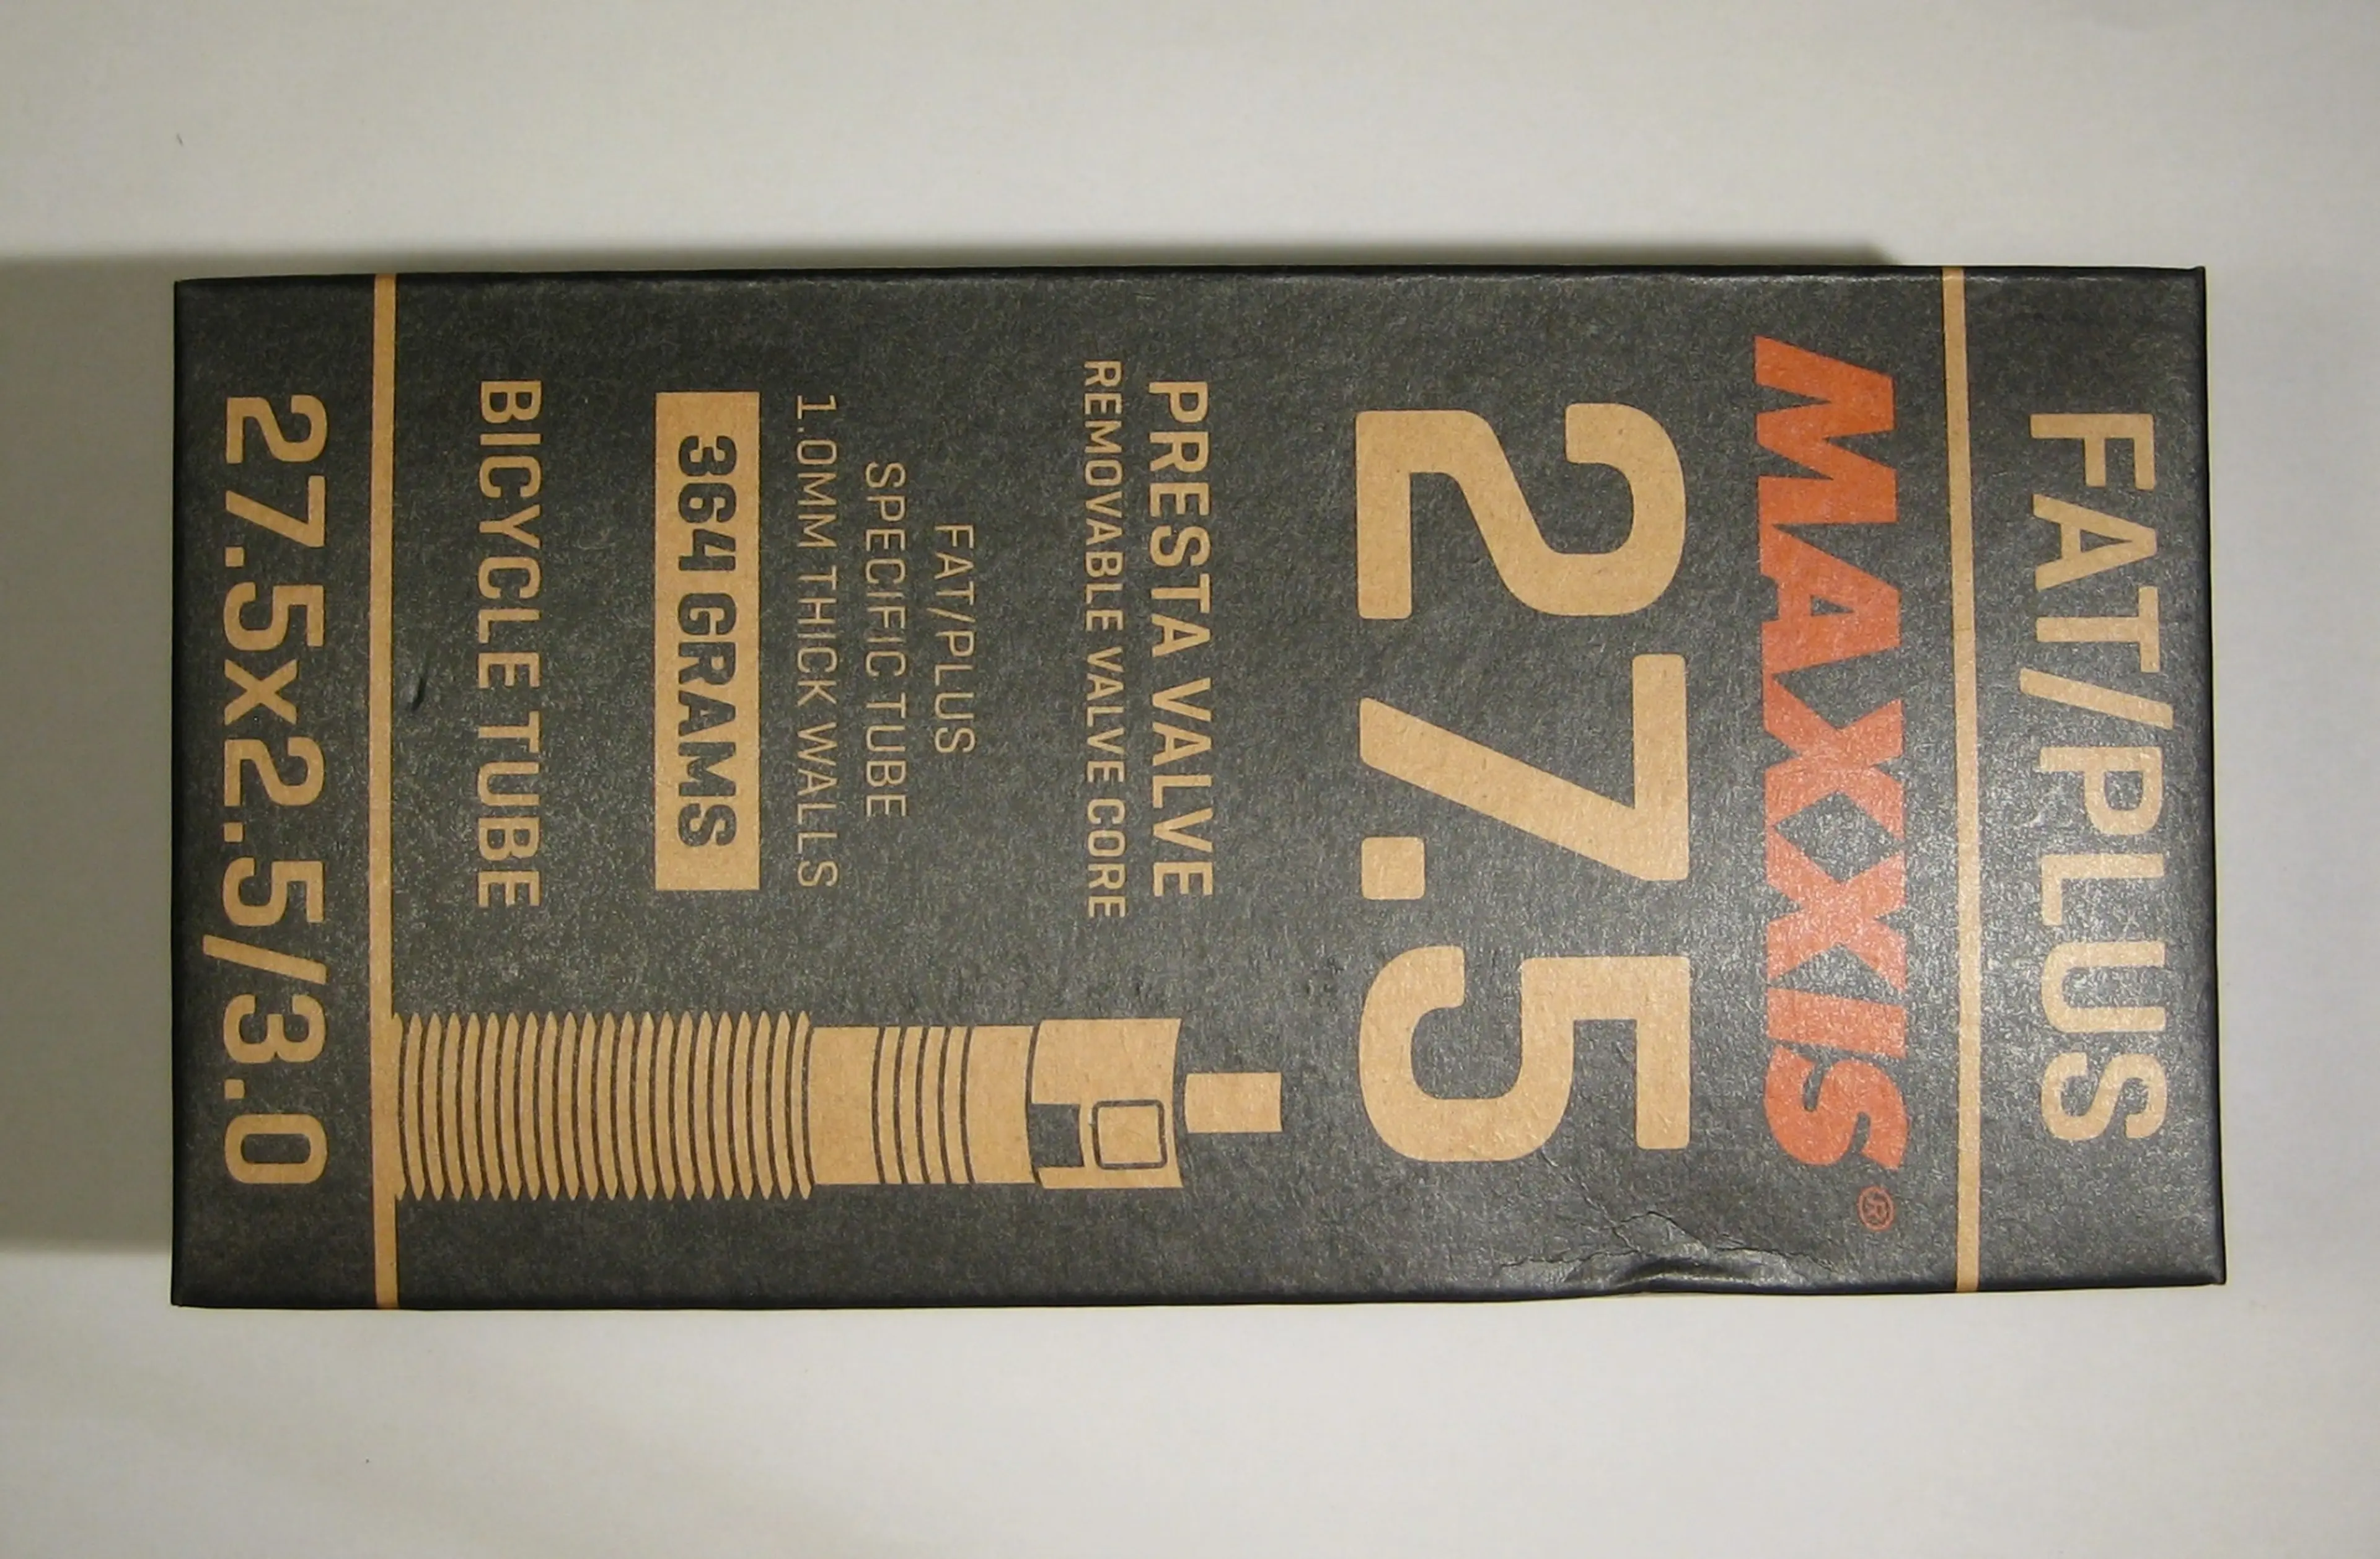 1. Camere Maxxis 27,5'' plus, noi